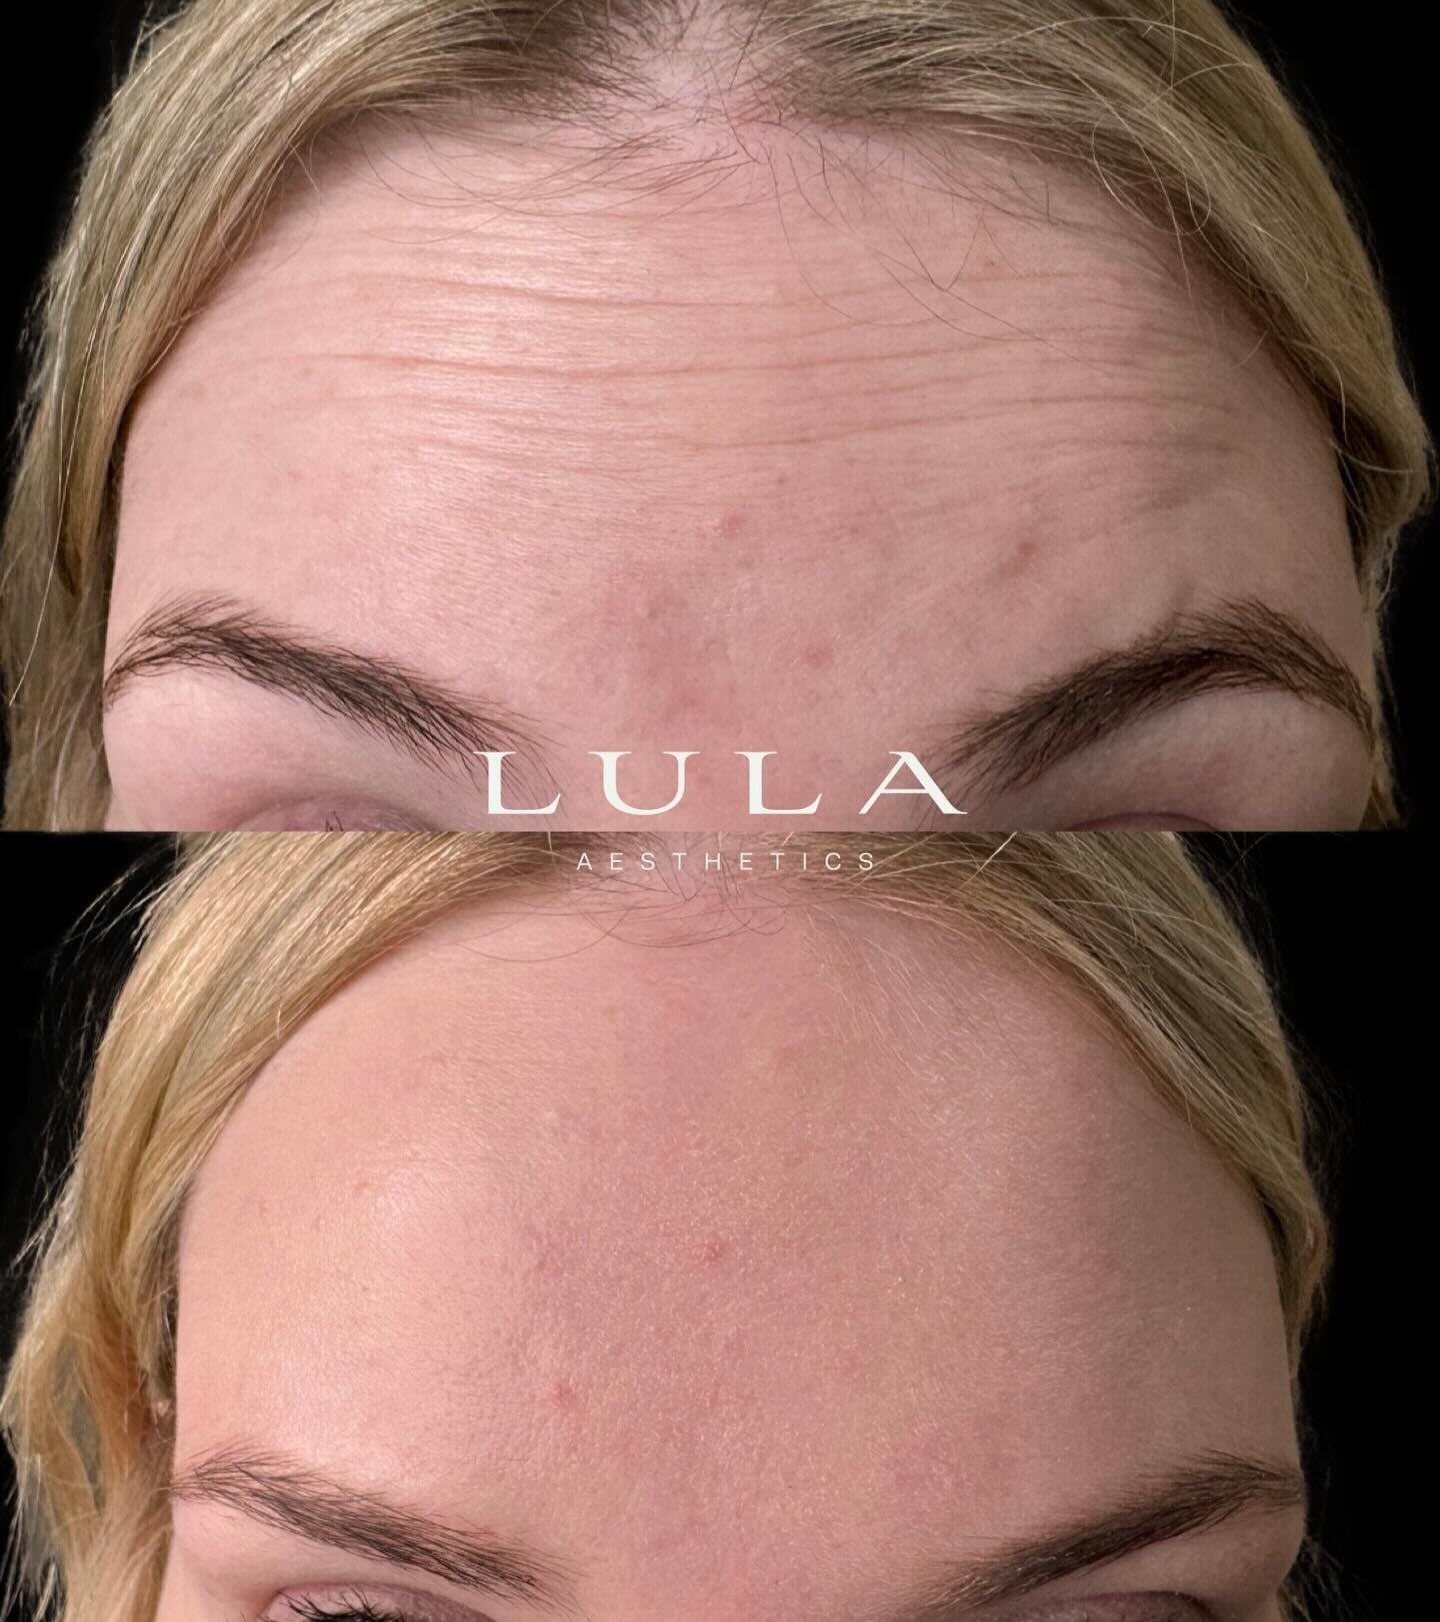 Treatment by RN Madi. 

Both photos taken while client is animating. 

Book via website www.lulaaesthetics.com 

Or follow links on social media sites. 

Free no obligation consults always available at Lula. 

No results are identical. 

Cosmetic pro